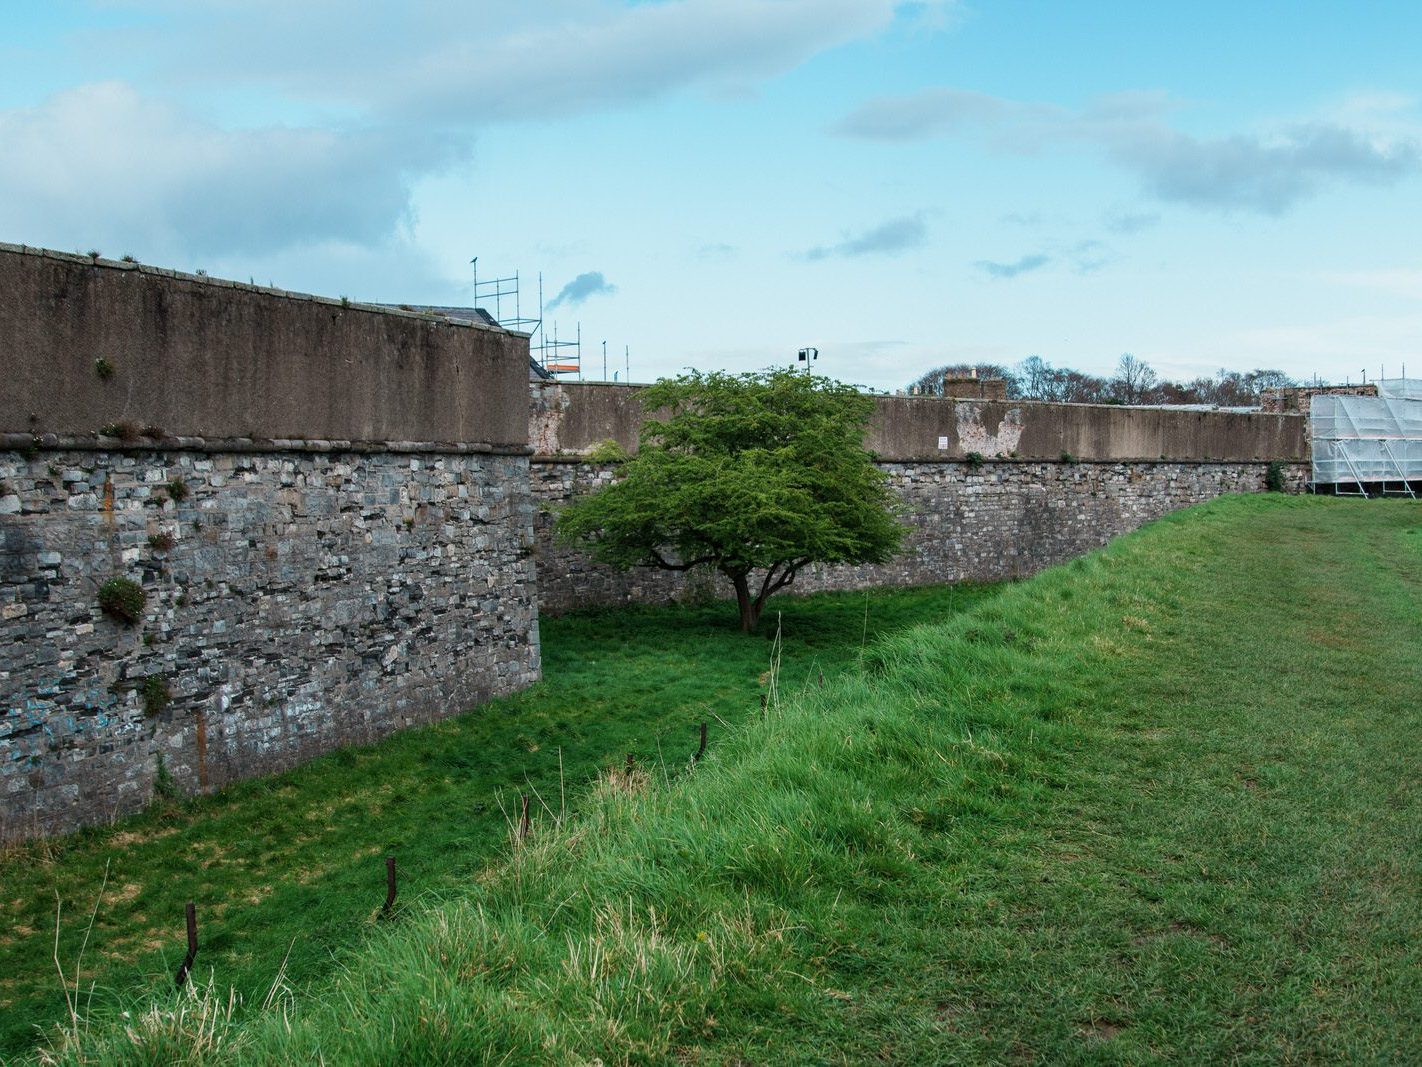 THE MAGAZINE FORT IN PHOENIX PARK [THERE IS MUCH INFORMATION AND A COMPLICATED STORY]-223498-1